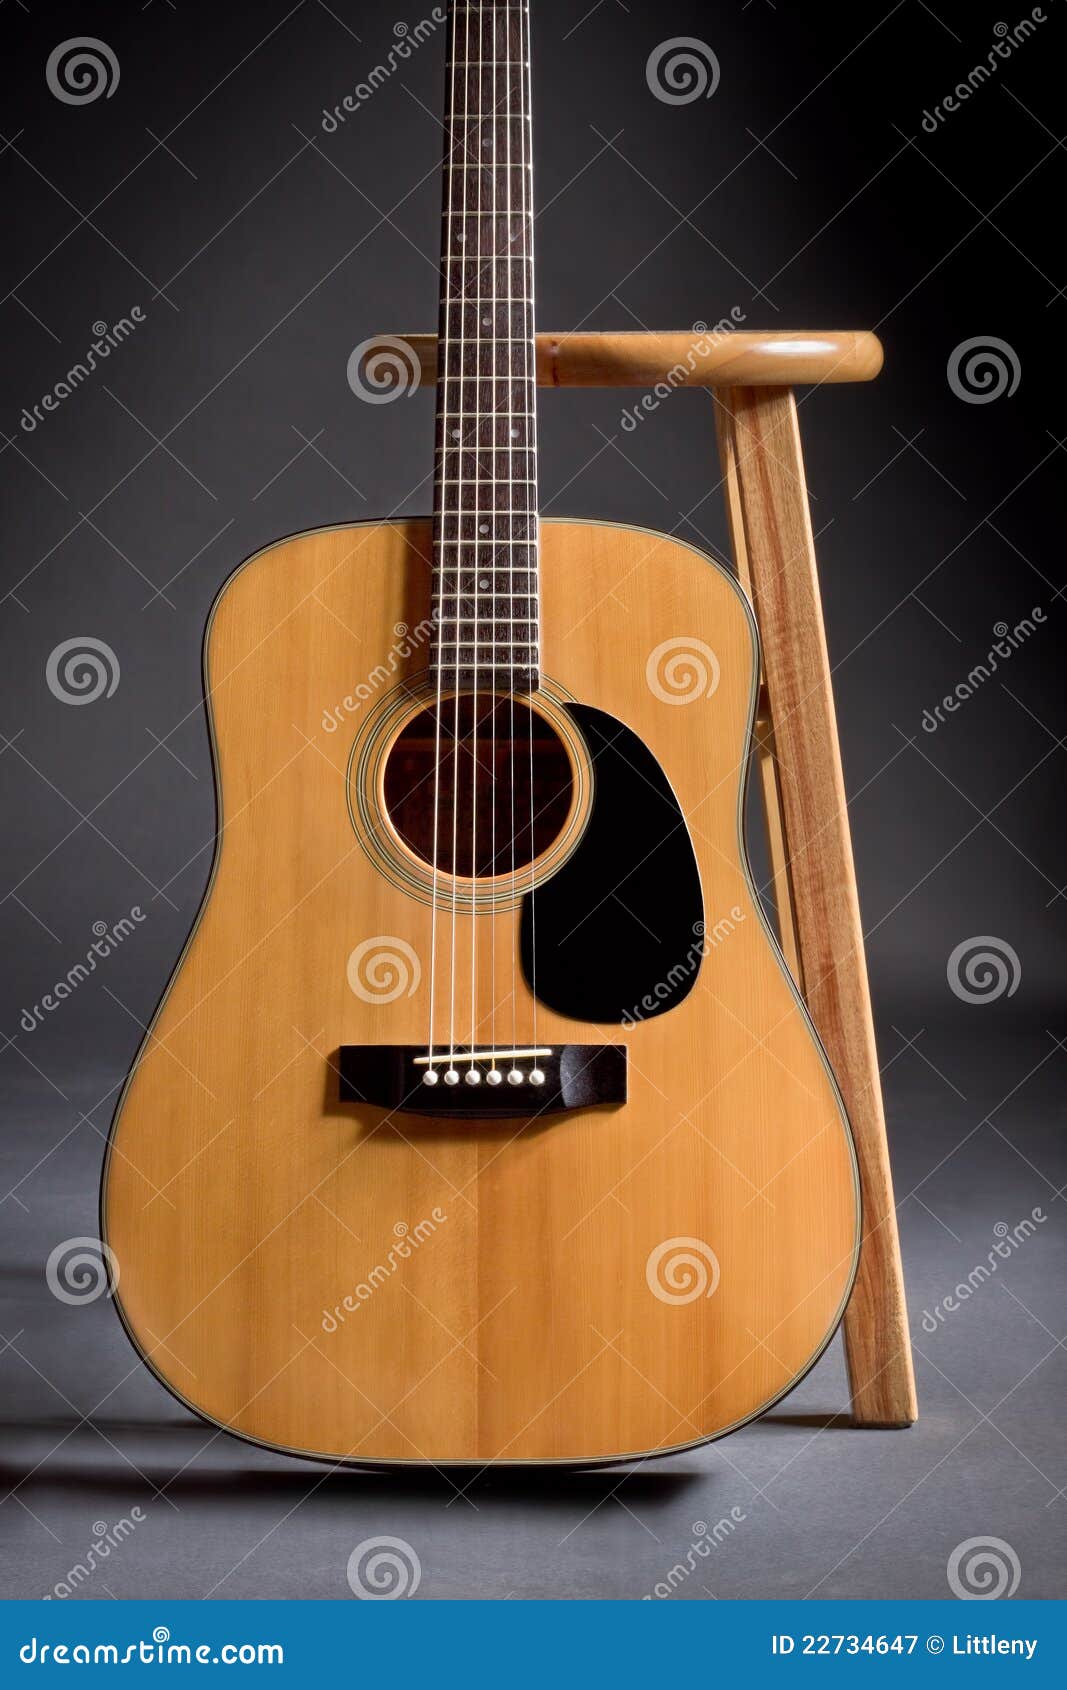 Acoustic guitar leaning against a wooden stool